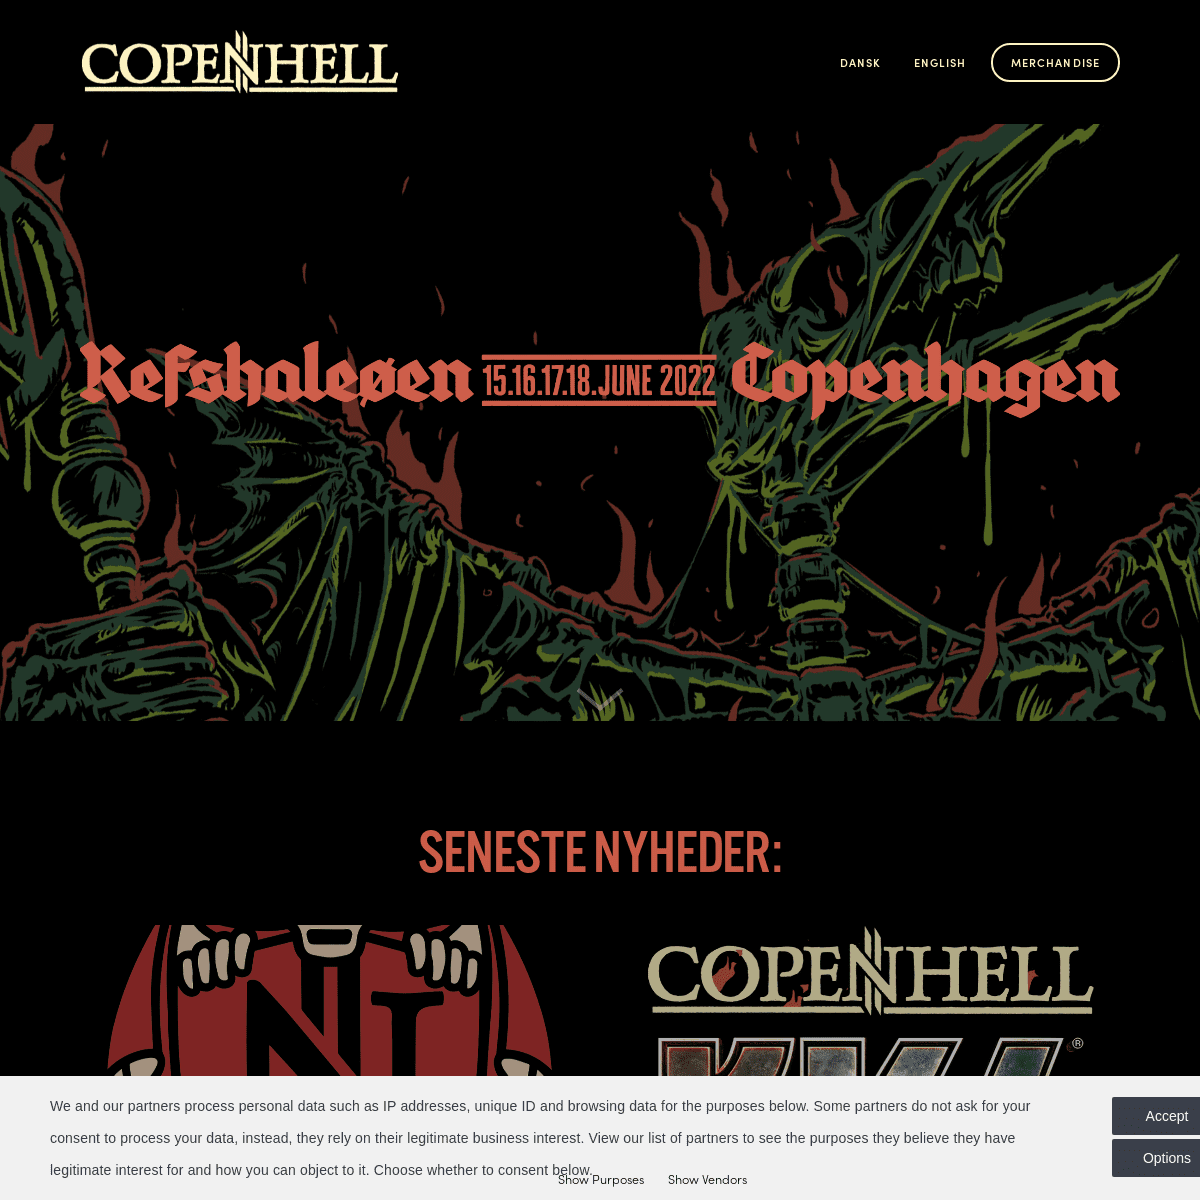 A complete backup of https://copenhell.dk